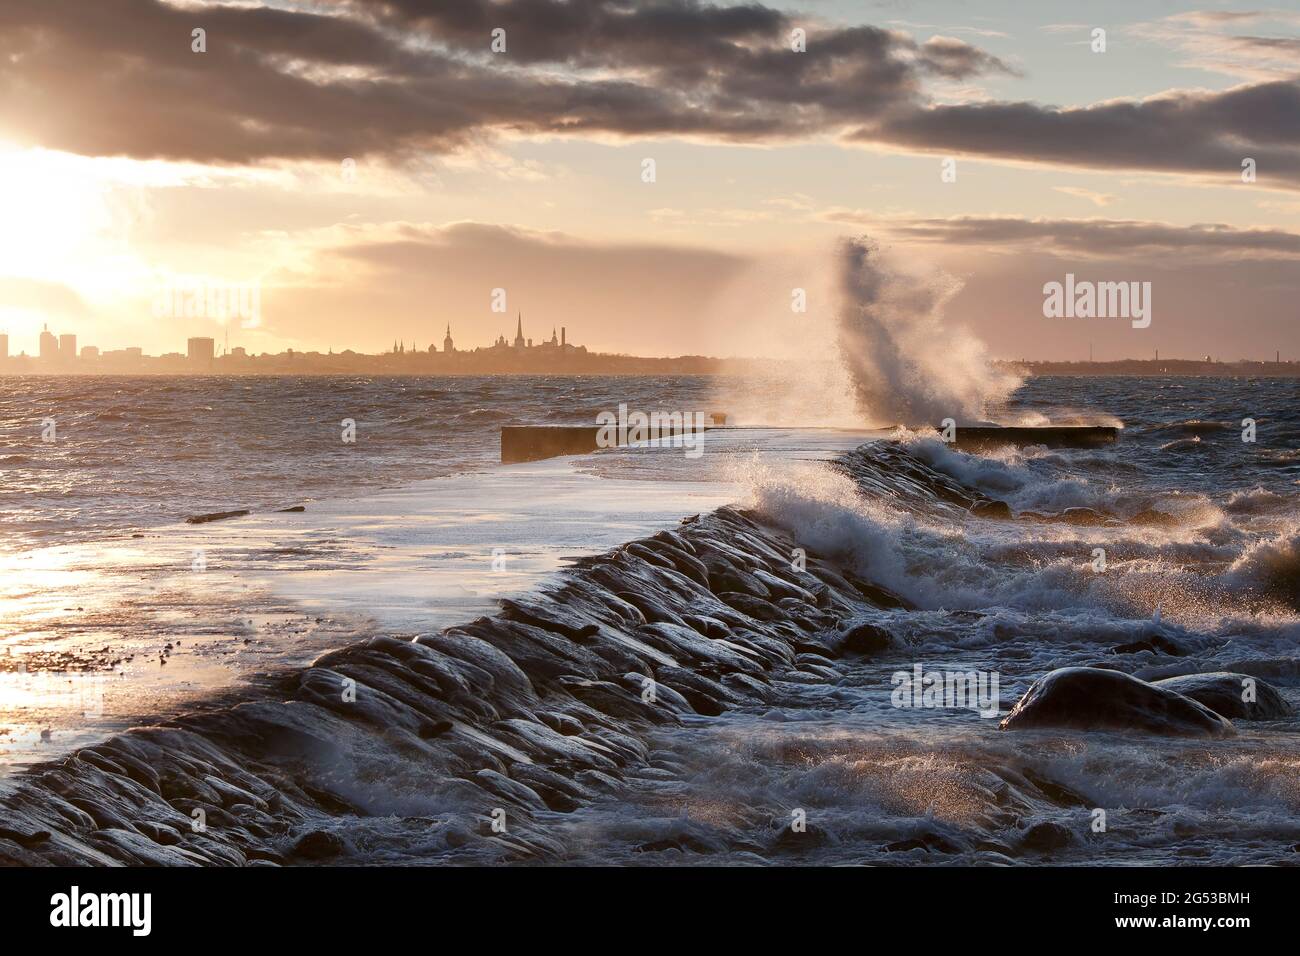 A weather storm in the Baltic Sea, waves crashing over a pier Stock Photo